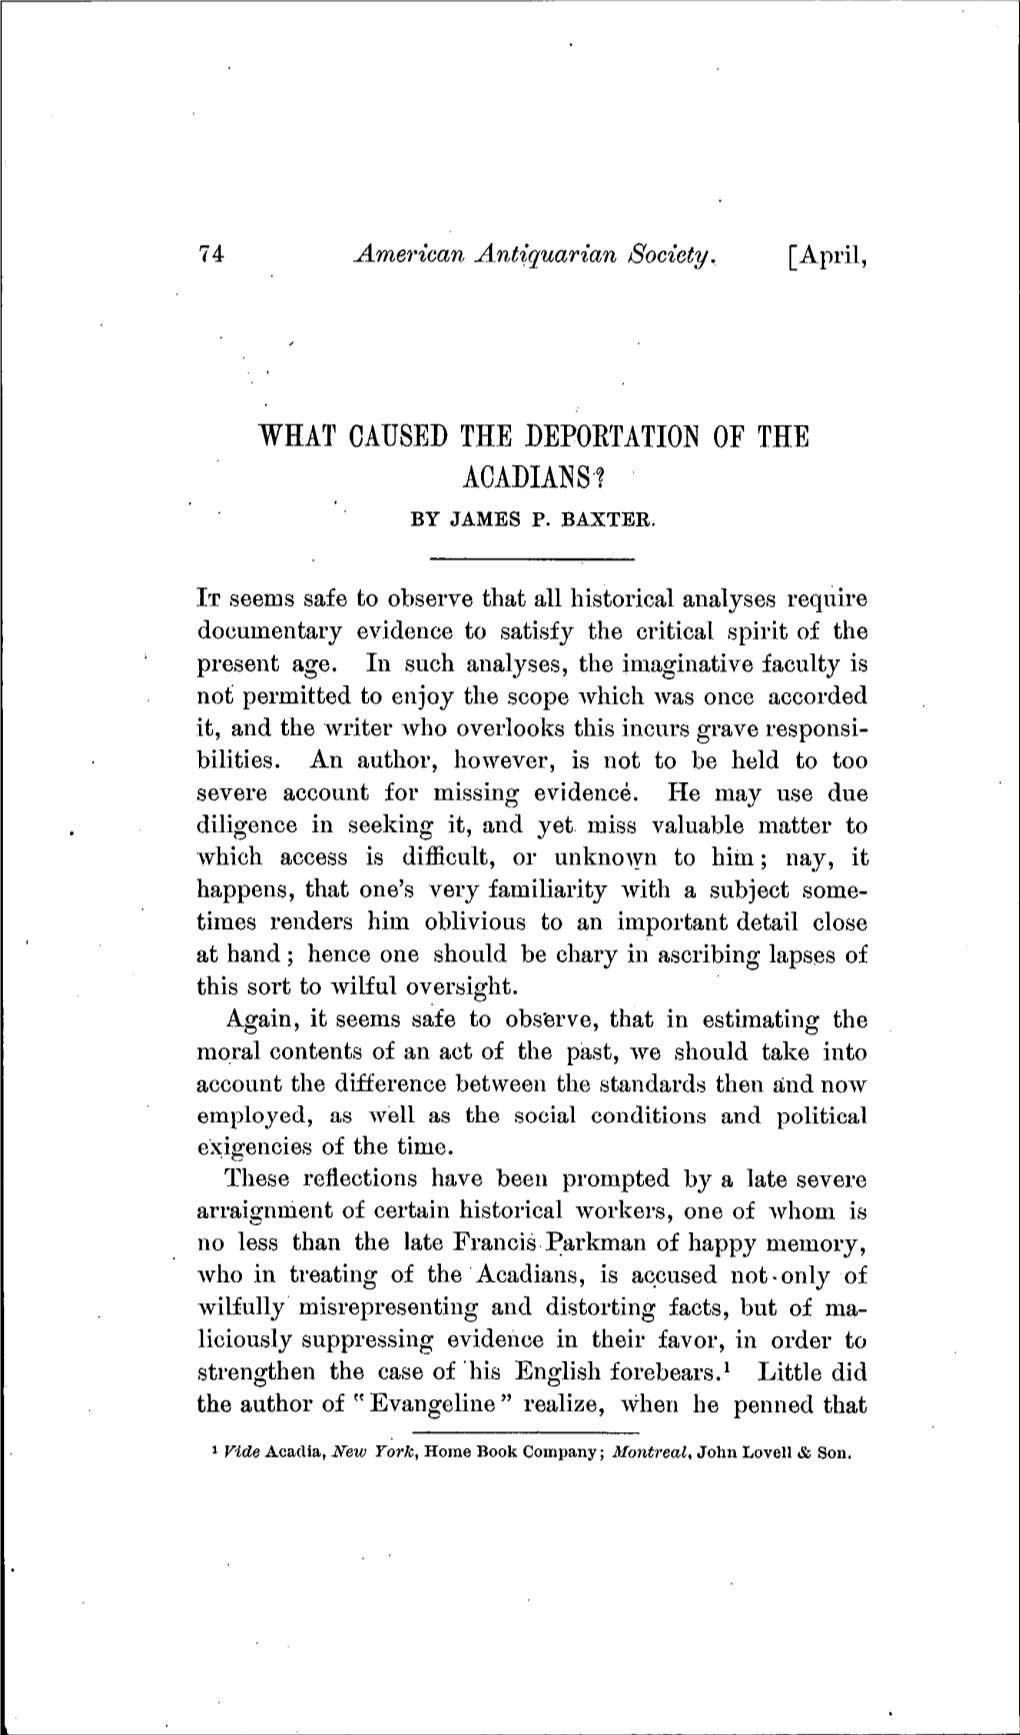 What Caused the Deportation Oe the Acadians? by James P